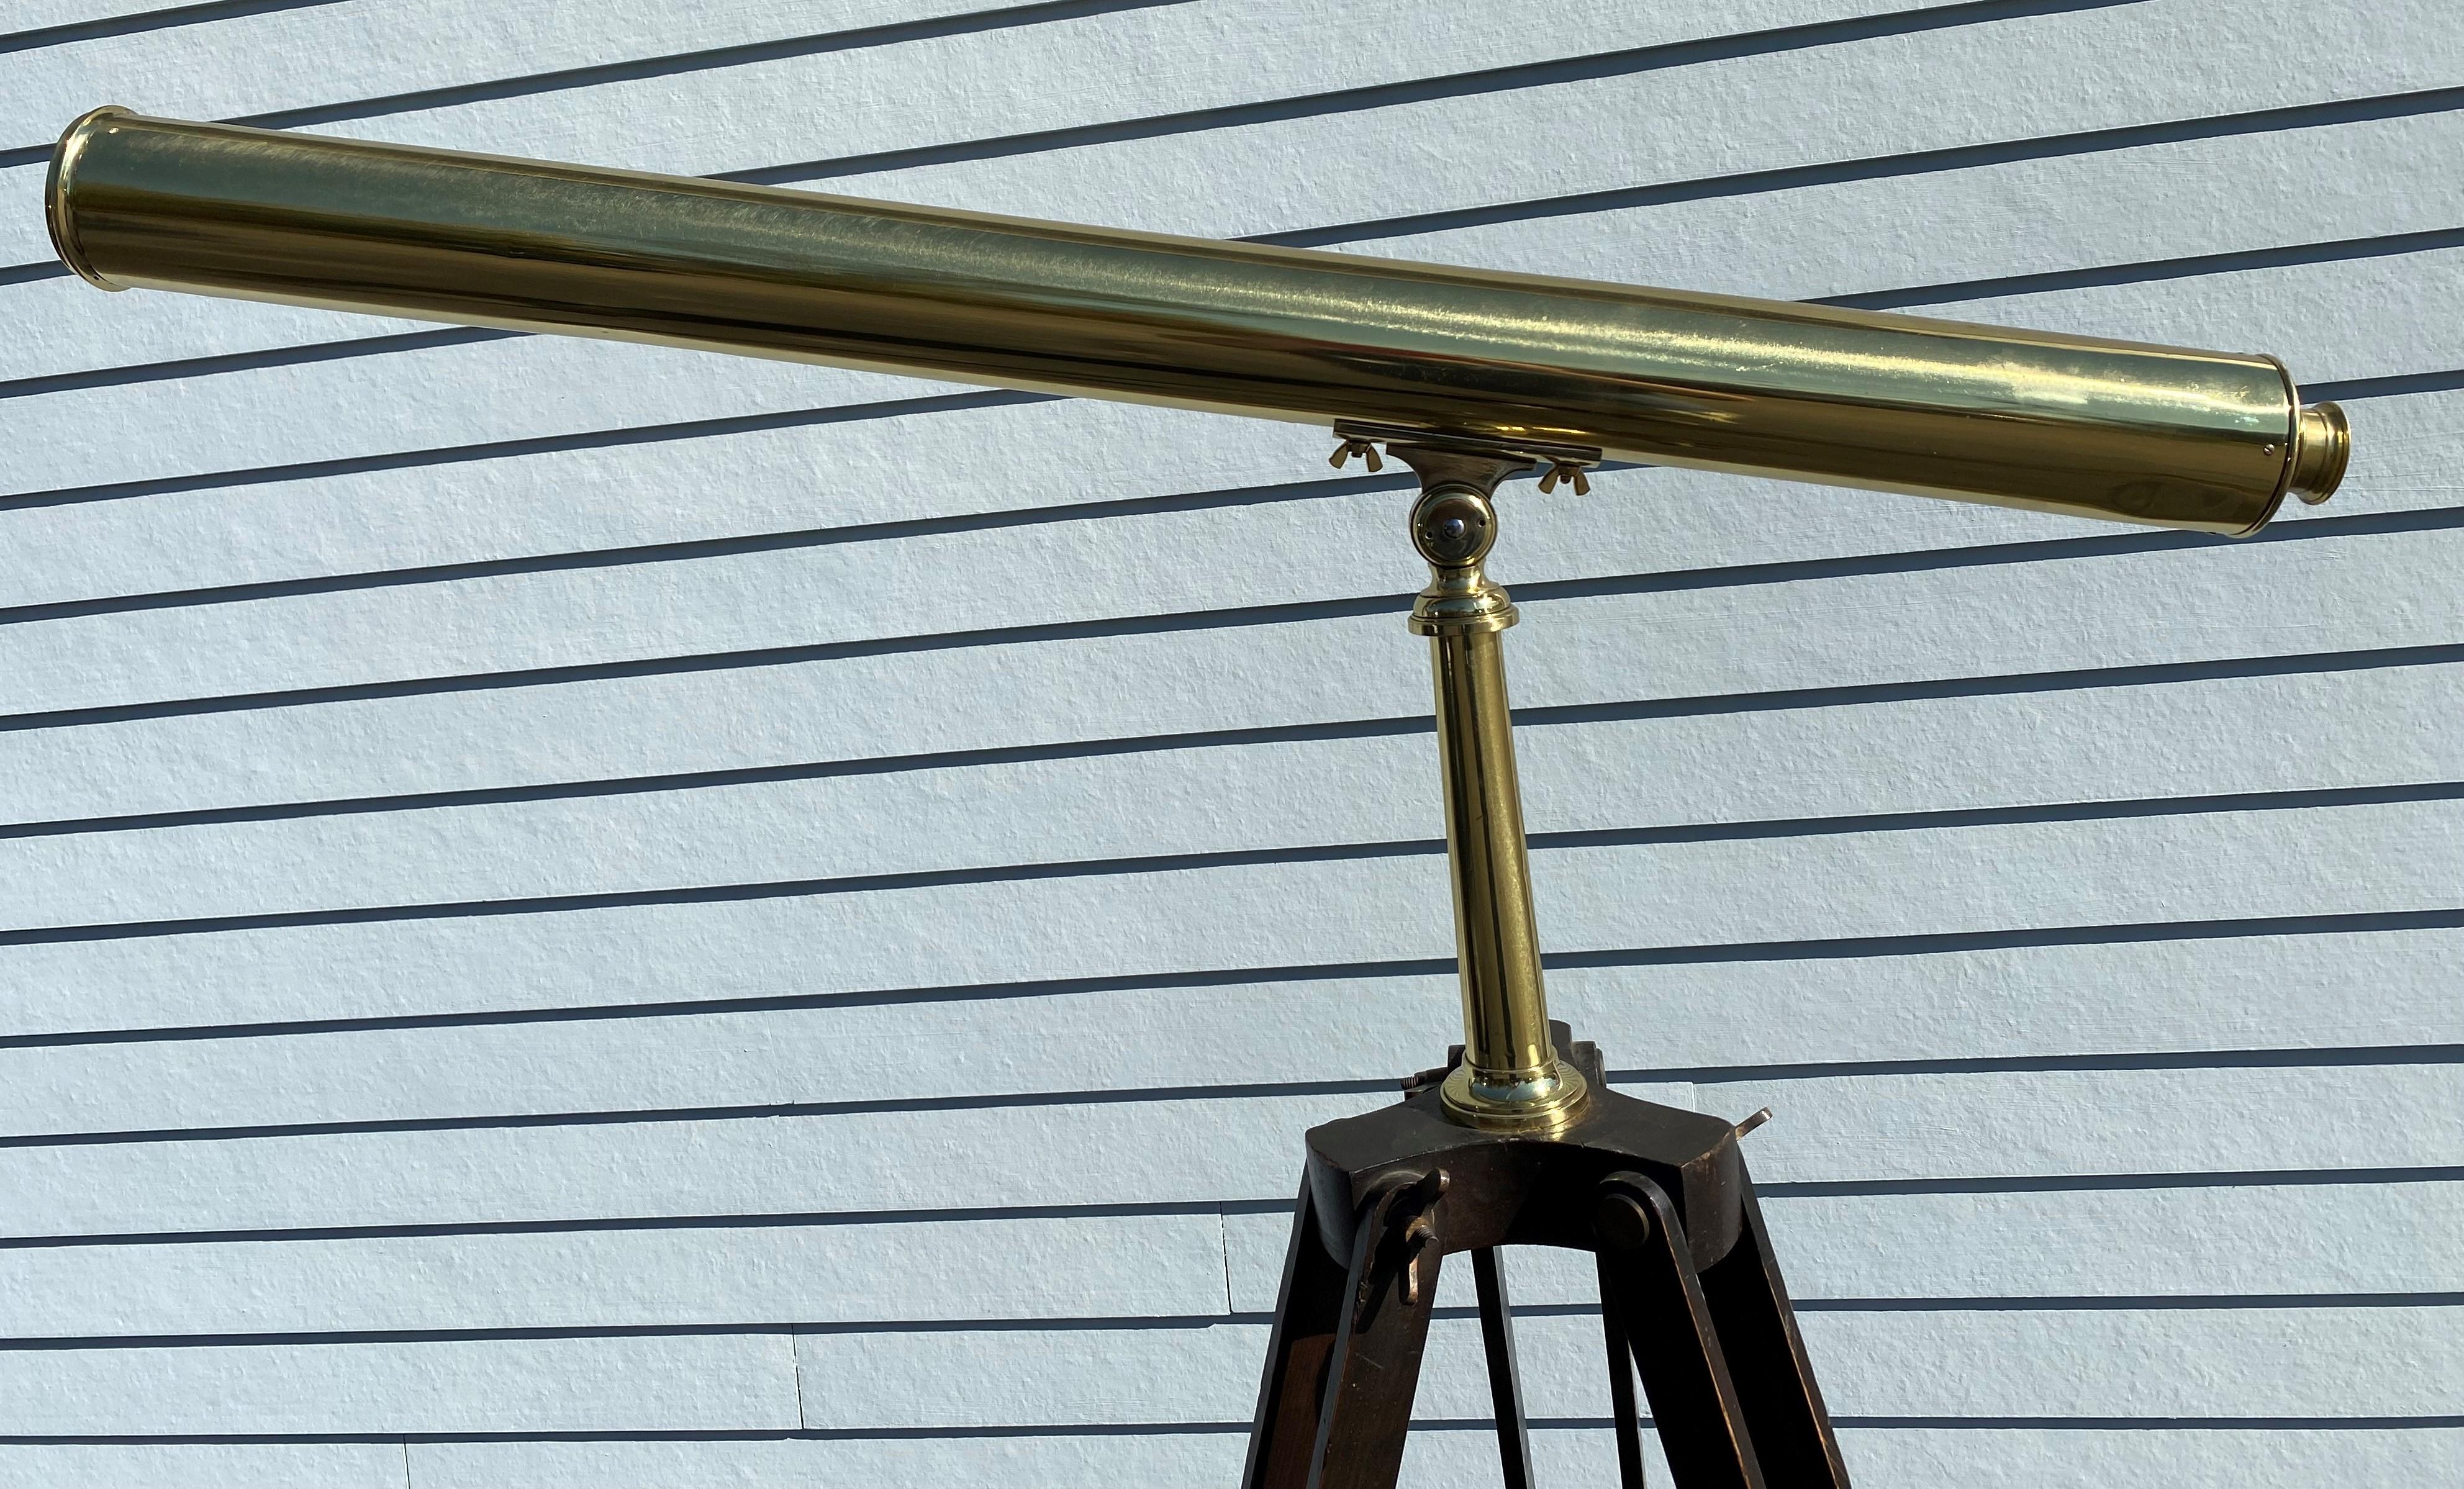 A fine example of a brass telescope on an adjustable wooden tripod signed A. Bardou, Paris, retailed by Thomas Hall & Son, Boston. Both names are incised on the lower eyepiece end of the telescope. Appears to be in good working order, dating to the